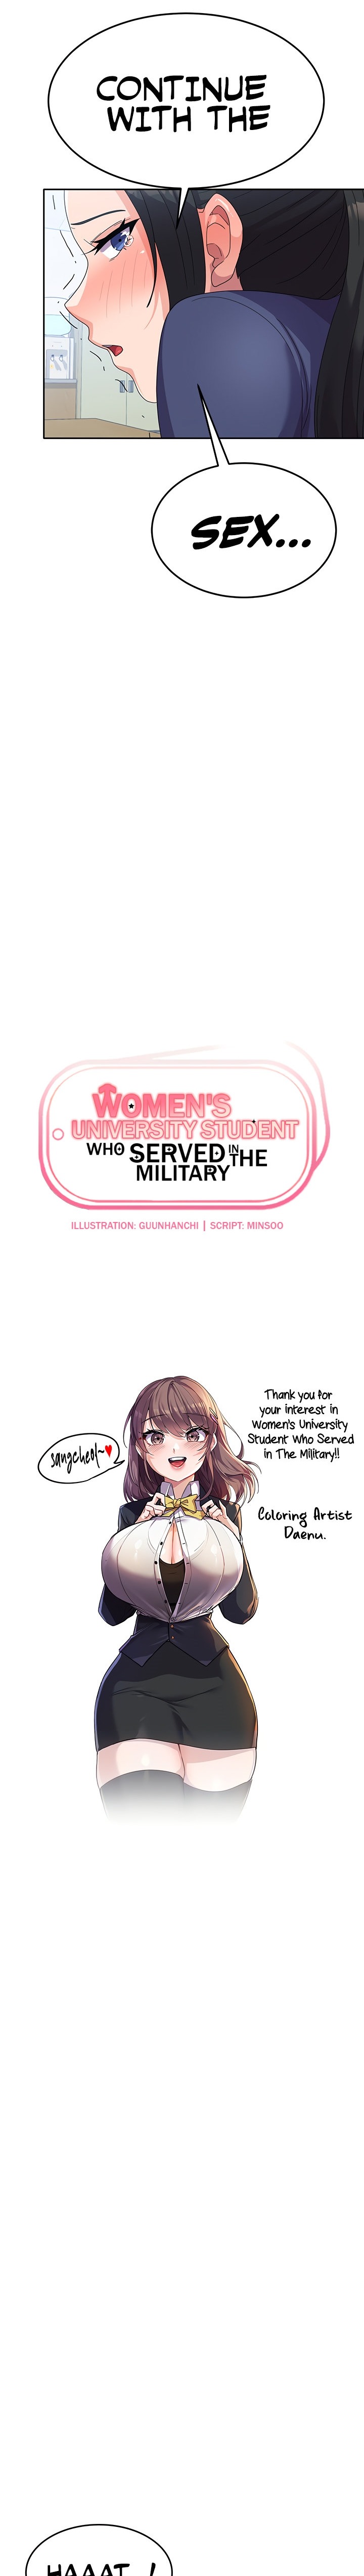 Women’s University Student who Served in the Military - Chapter 21 Page 2